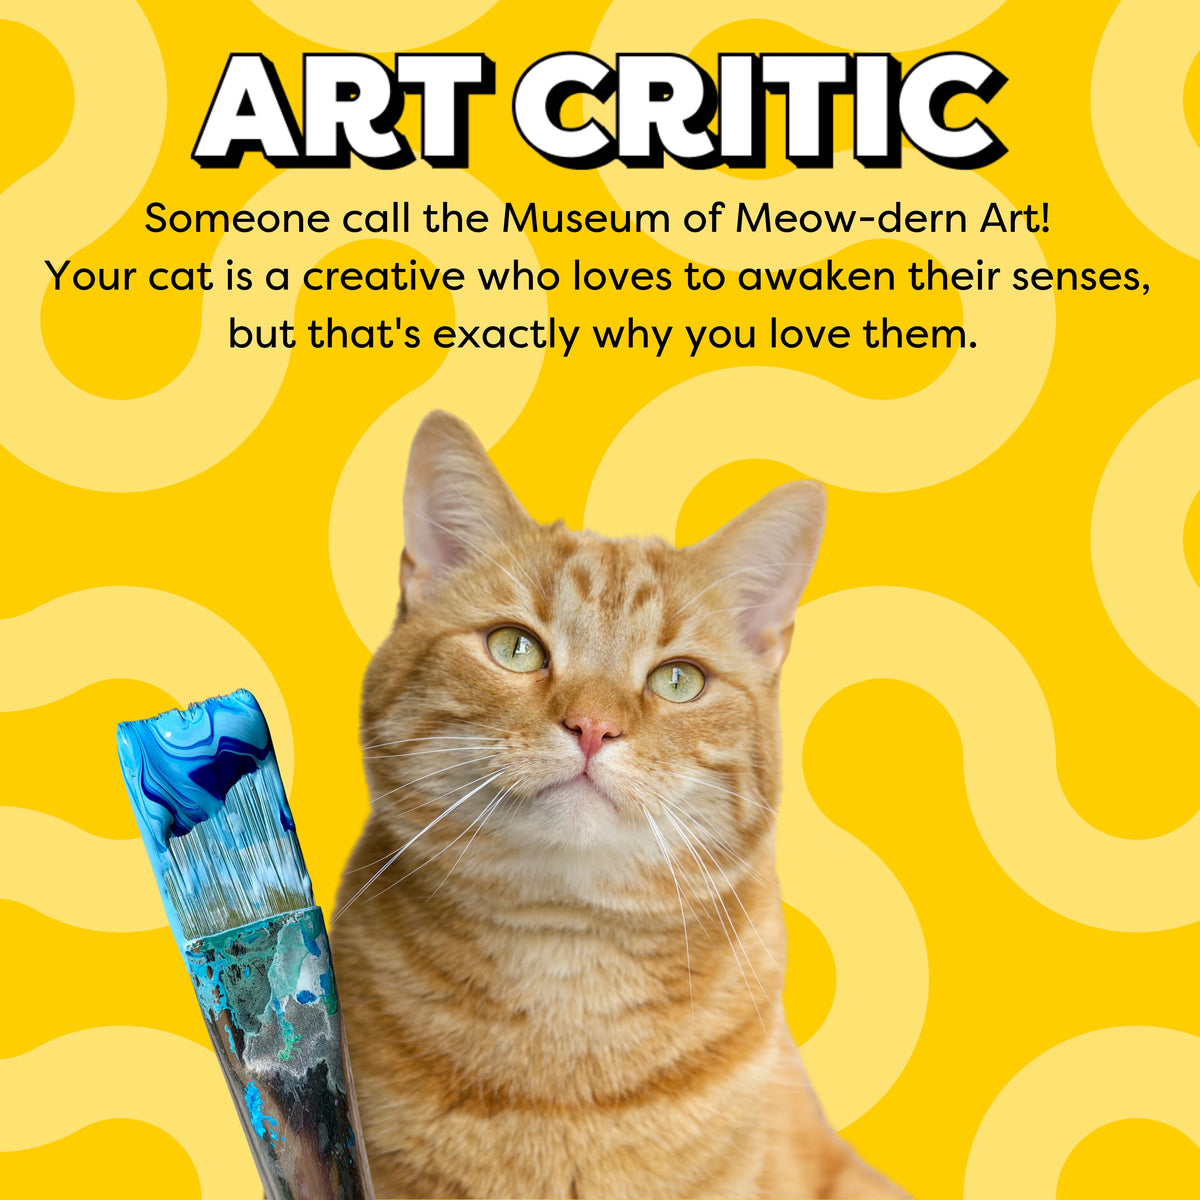 Art critic: someone call the museum of meow-dern Art! Your cat is a creative who loves to awaken their senses, but that's exactly why you love them